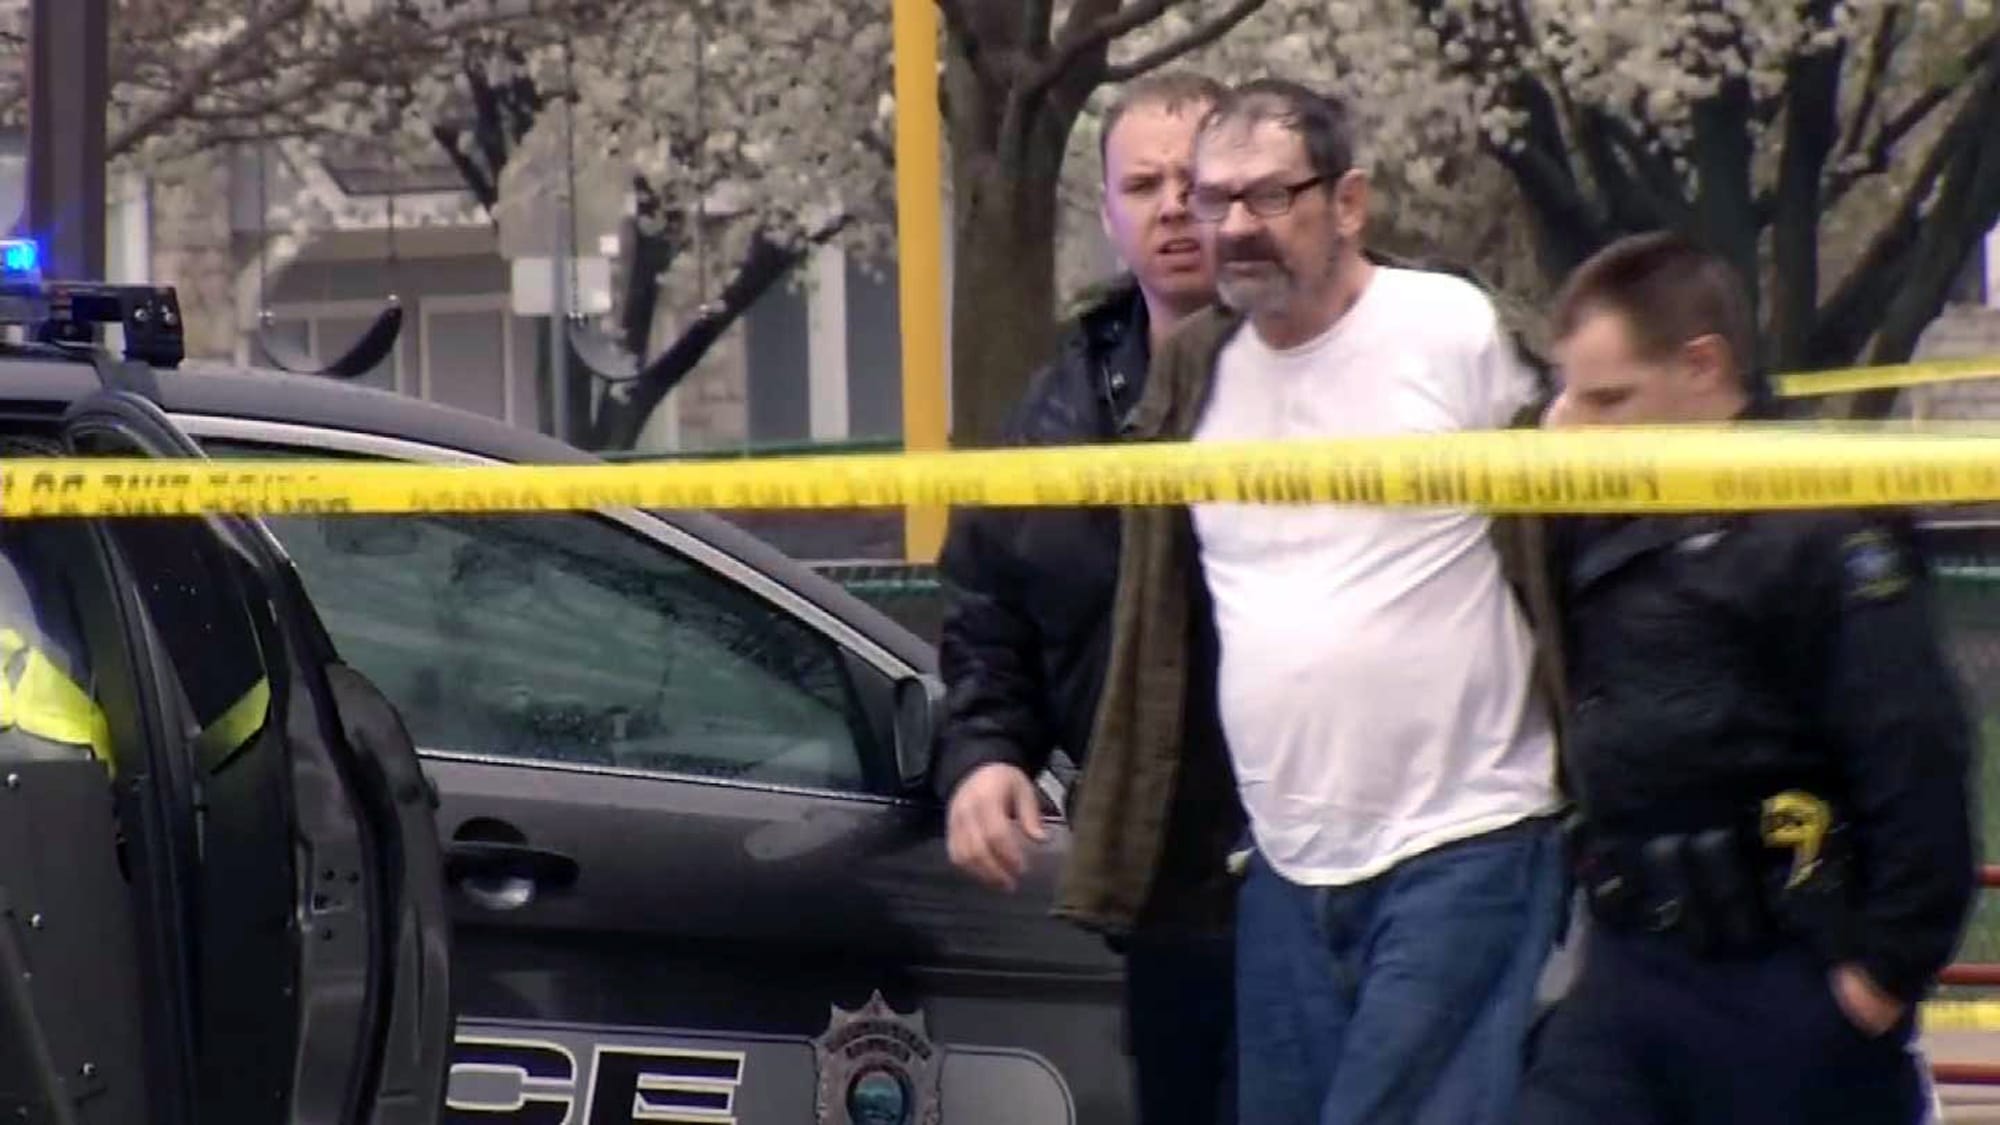 In this Sunday image from video provided by KCTV-5, Frazier Glenn Cross, also known as Frazier Glenn Miller, is escorted by police in an elementary school parking lot in Overland Park, Kan.